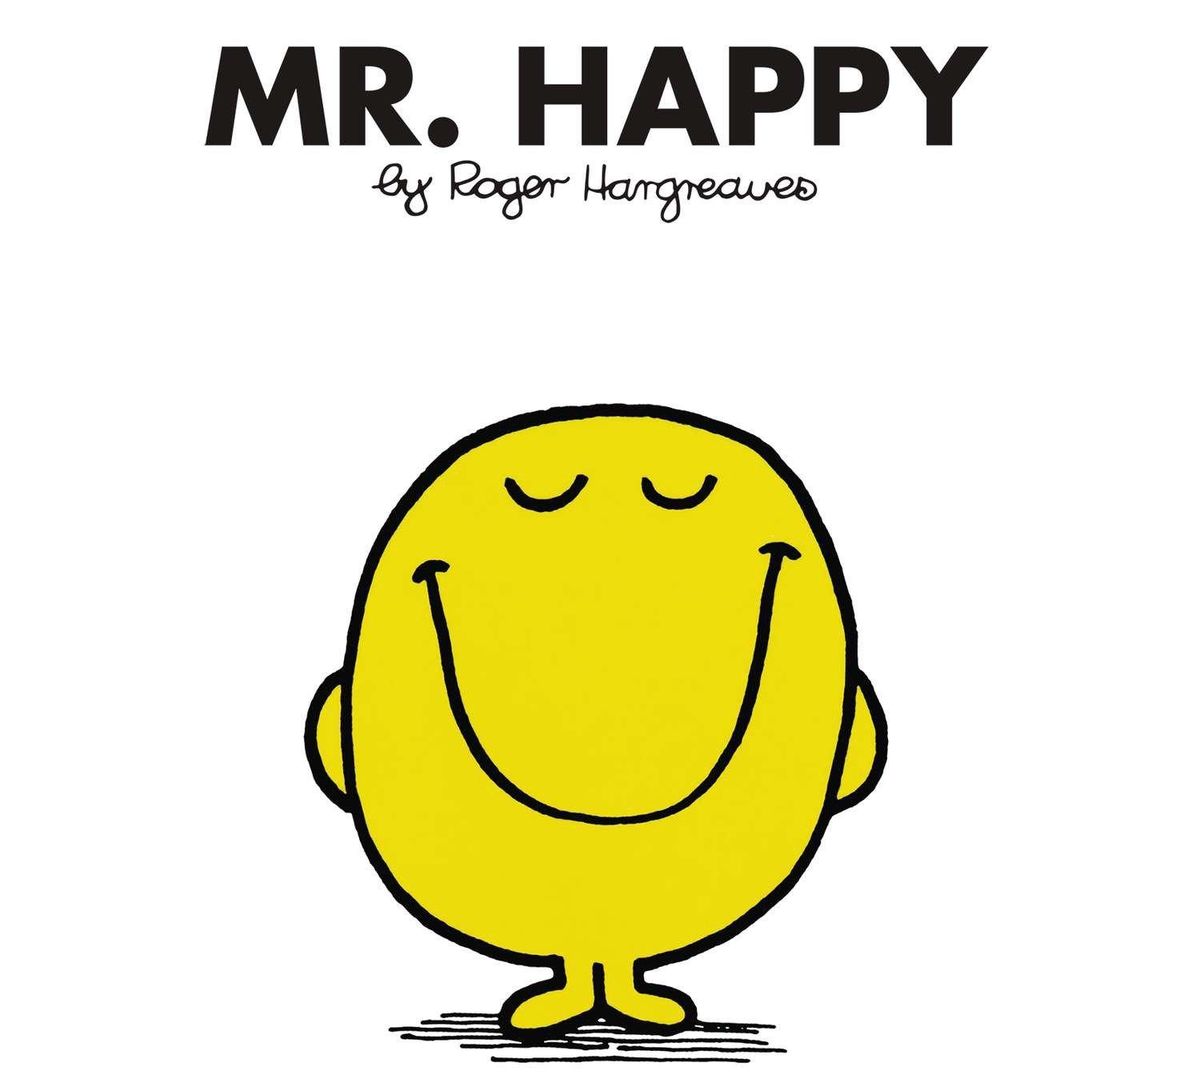 Be happy mr. Мистер Хэппи. Mr men and little Miss Mr. Happy. Роджер Харгривз. Hargreaves Roger "Mr. Clumsy".